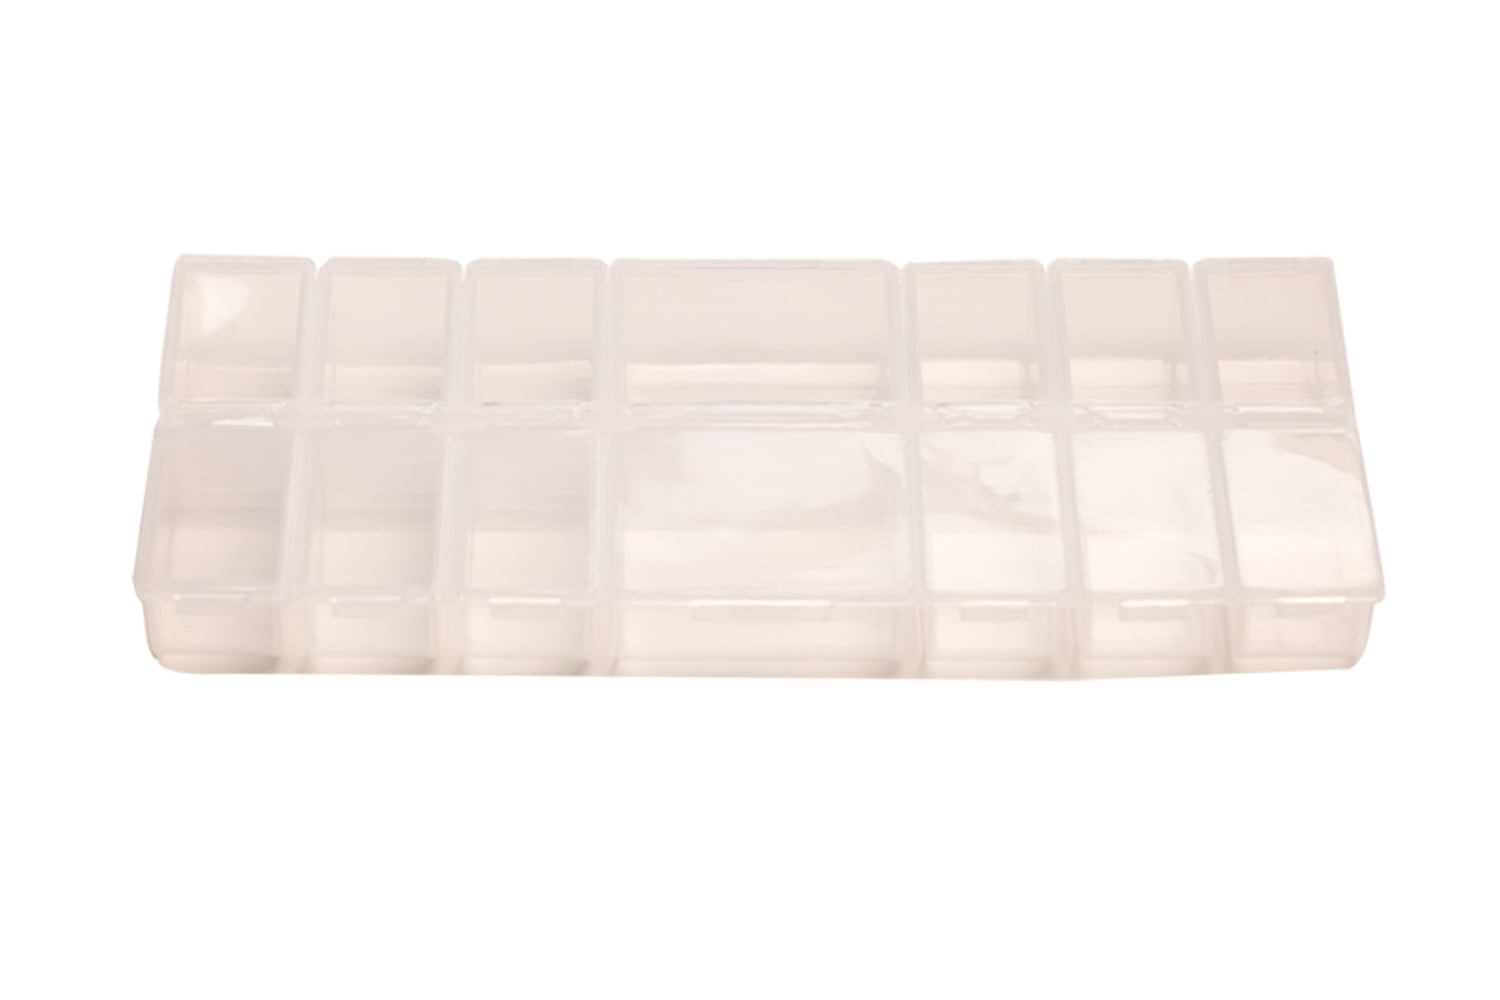 Pack of 5-5.125" Small Compartment Organizer Boxes with 10 Adjustable Dividers 